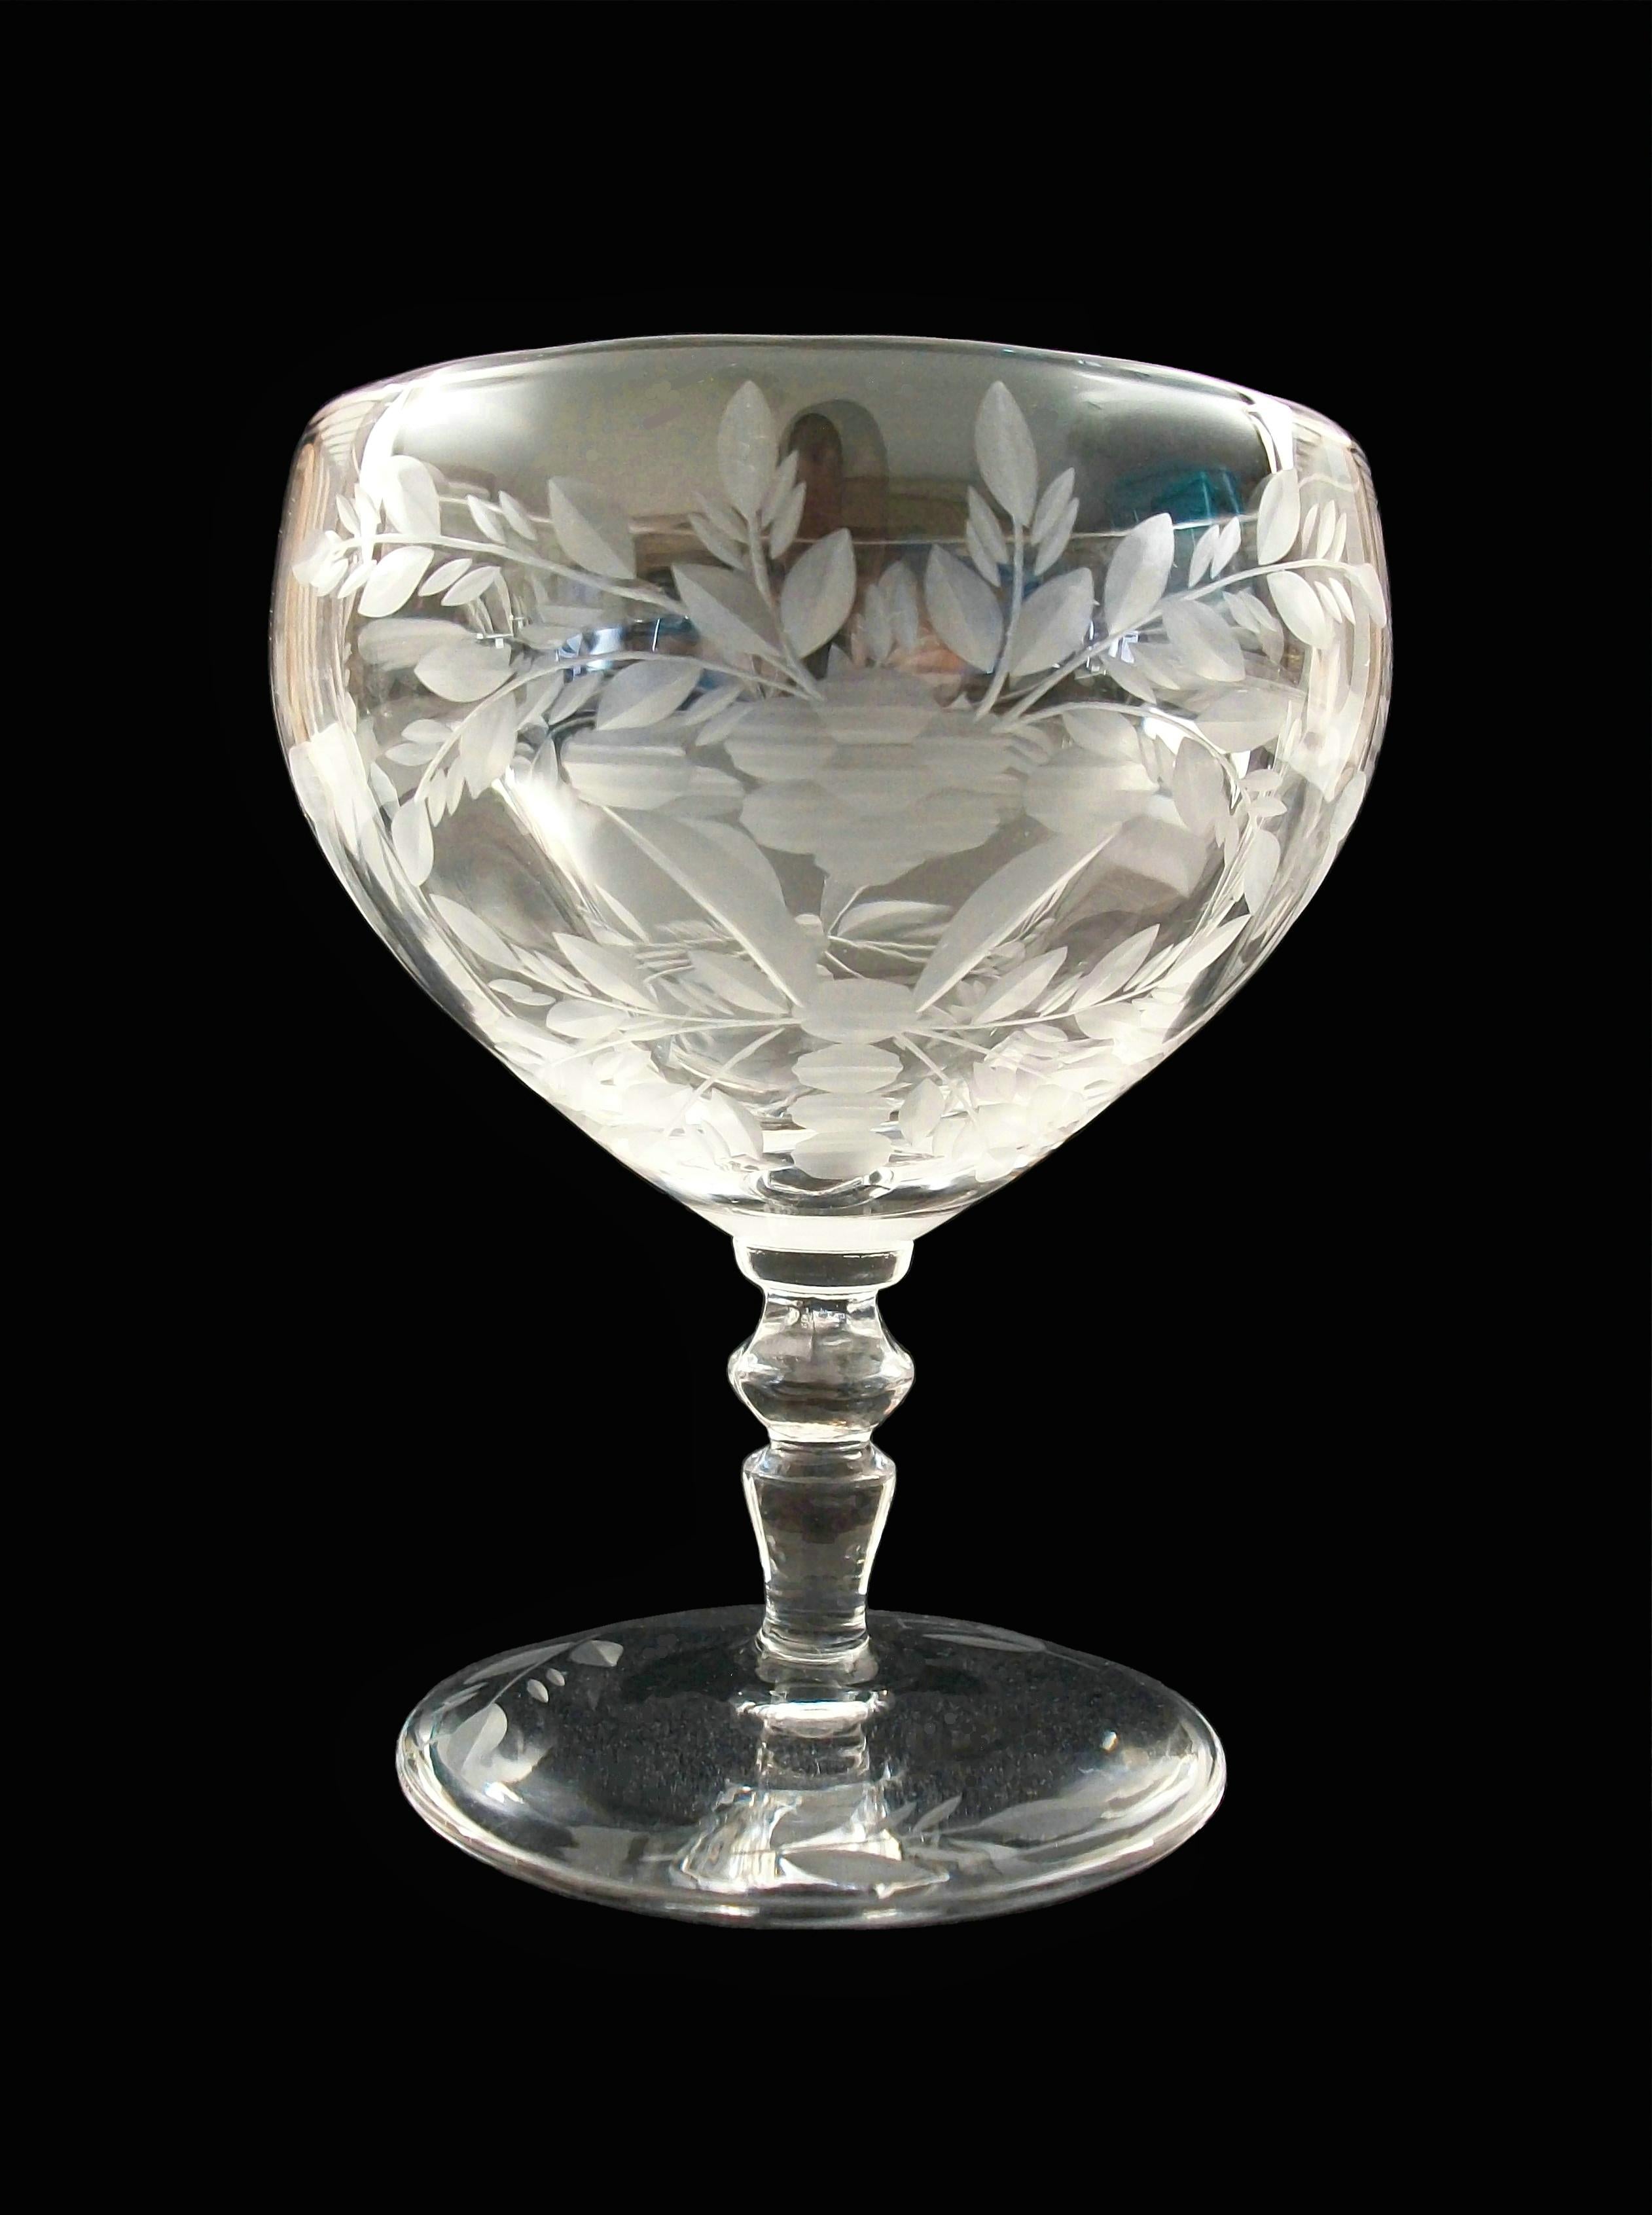 Vintage set of exceptional crystal Champagne coupes - eight pieces - wheel cut by hand featuring flowers and garlands of leaves - branches with leaves to the base - clear crystal - polished finish - unsigned - circa 1930's.

Excellent état vintage -